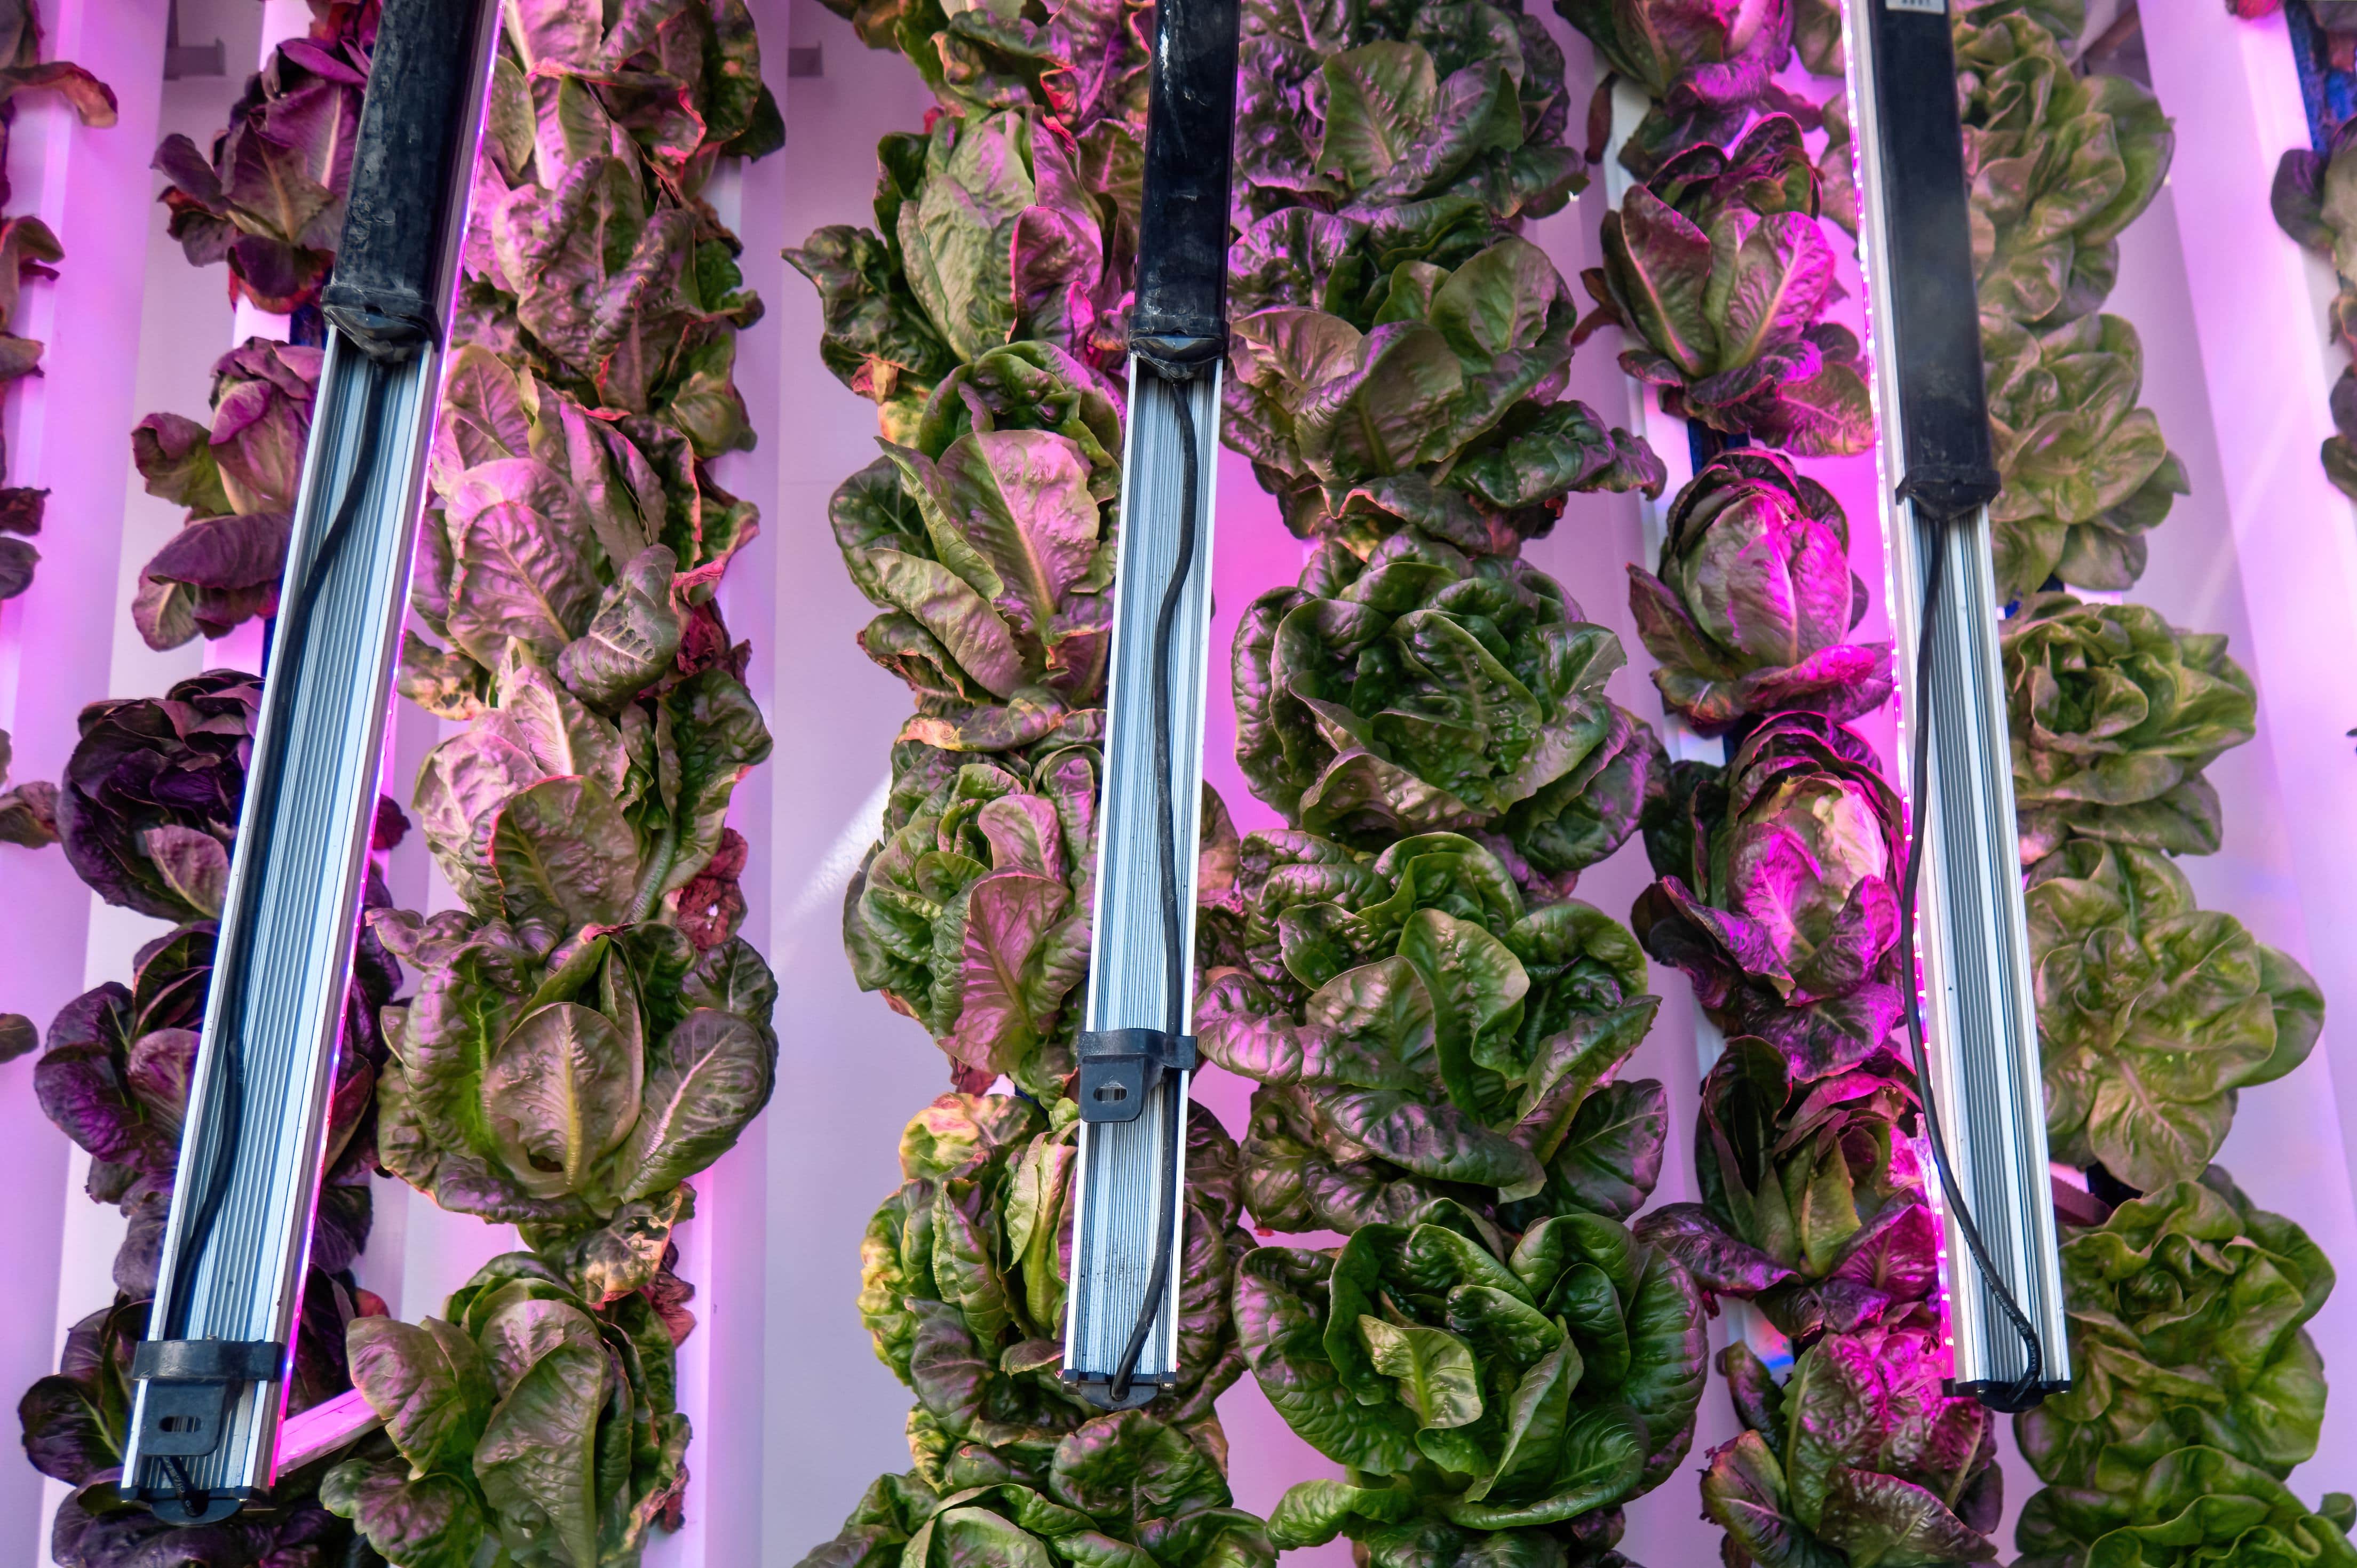 What's The Difference Between LED lights And LED Grow Lights?